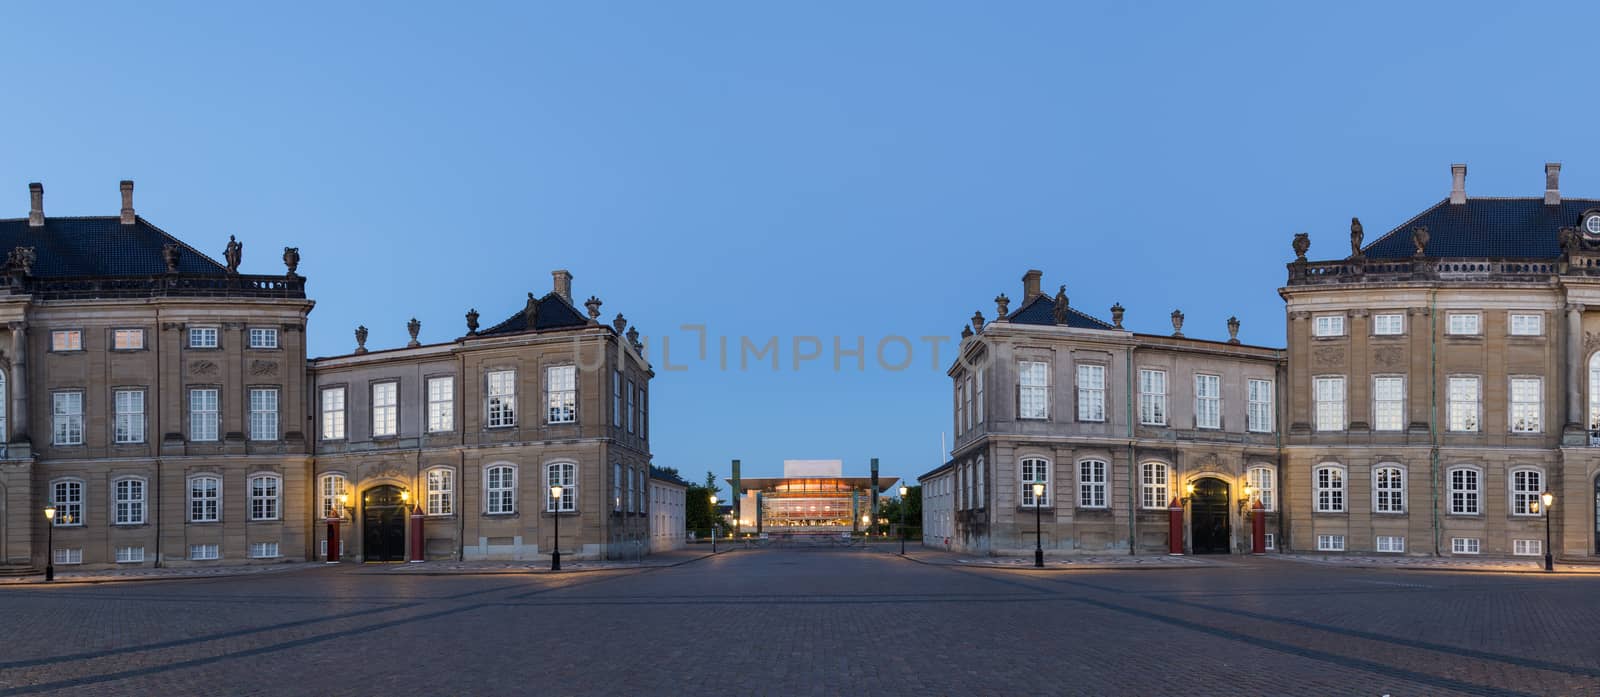 Copenhagen, Denmark - June 05, 2016: Evening photography of Amalienborg Palace and the opera house in the background